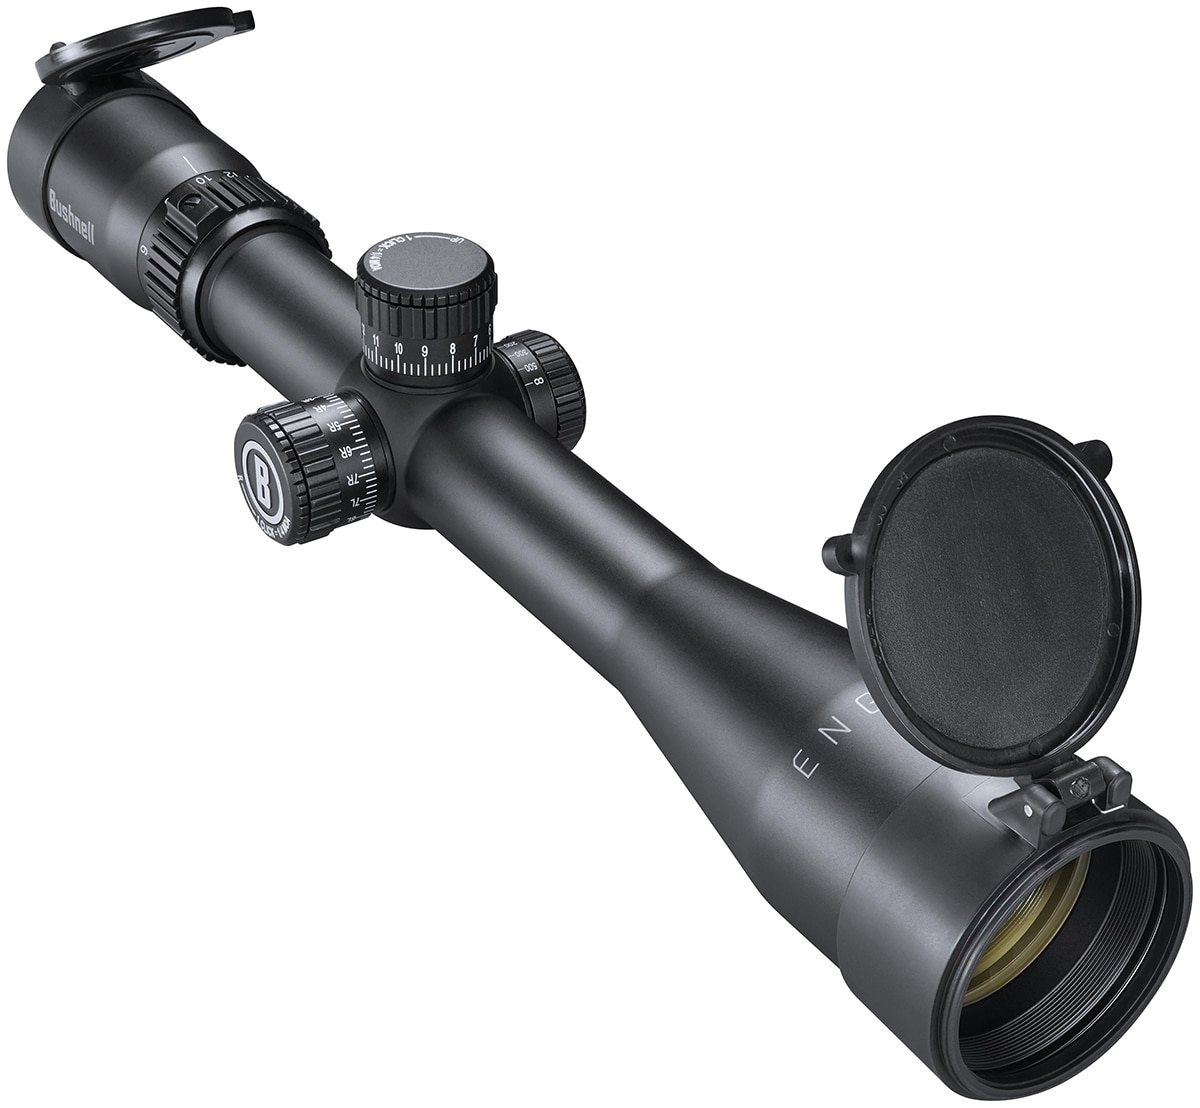 The Engage riflescope line features the EXO barrier which protects against dust, oil and debris. (Photo: Vista Outdoor)